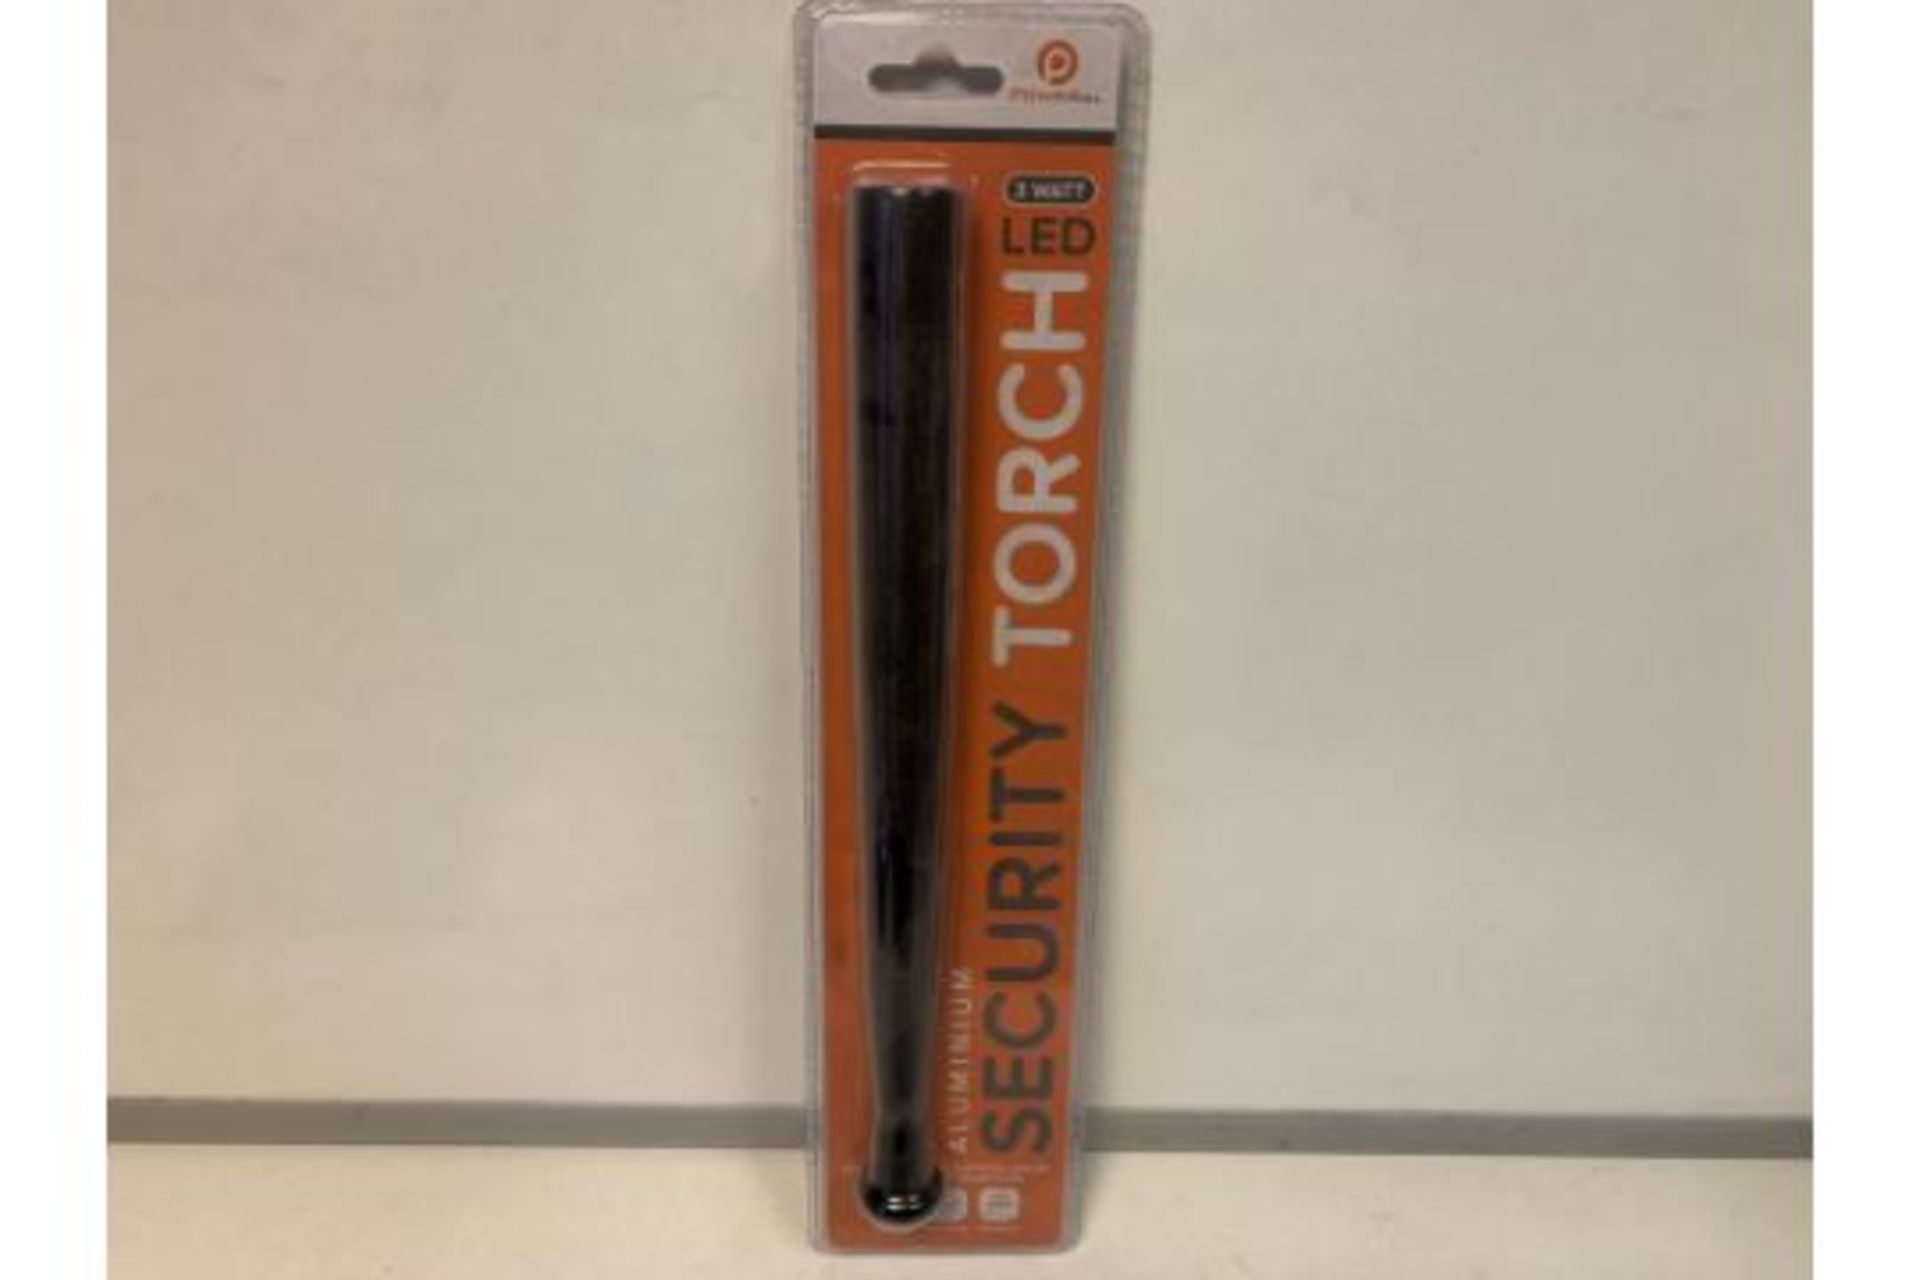 15 X NEW PACKAGED POWERFULL 3 WATT LED ALUMINIUM SECURITY TORCHES. 10,000 HOURS LIFE. UP TO 250FT